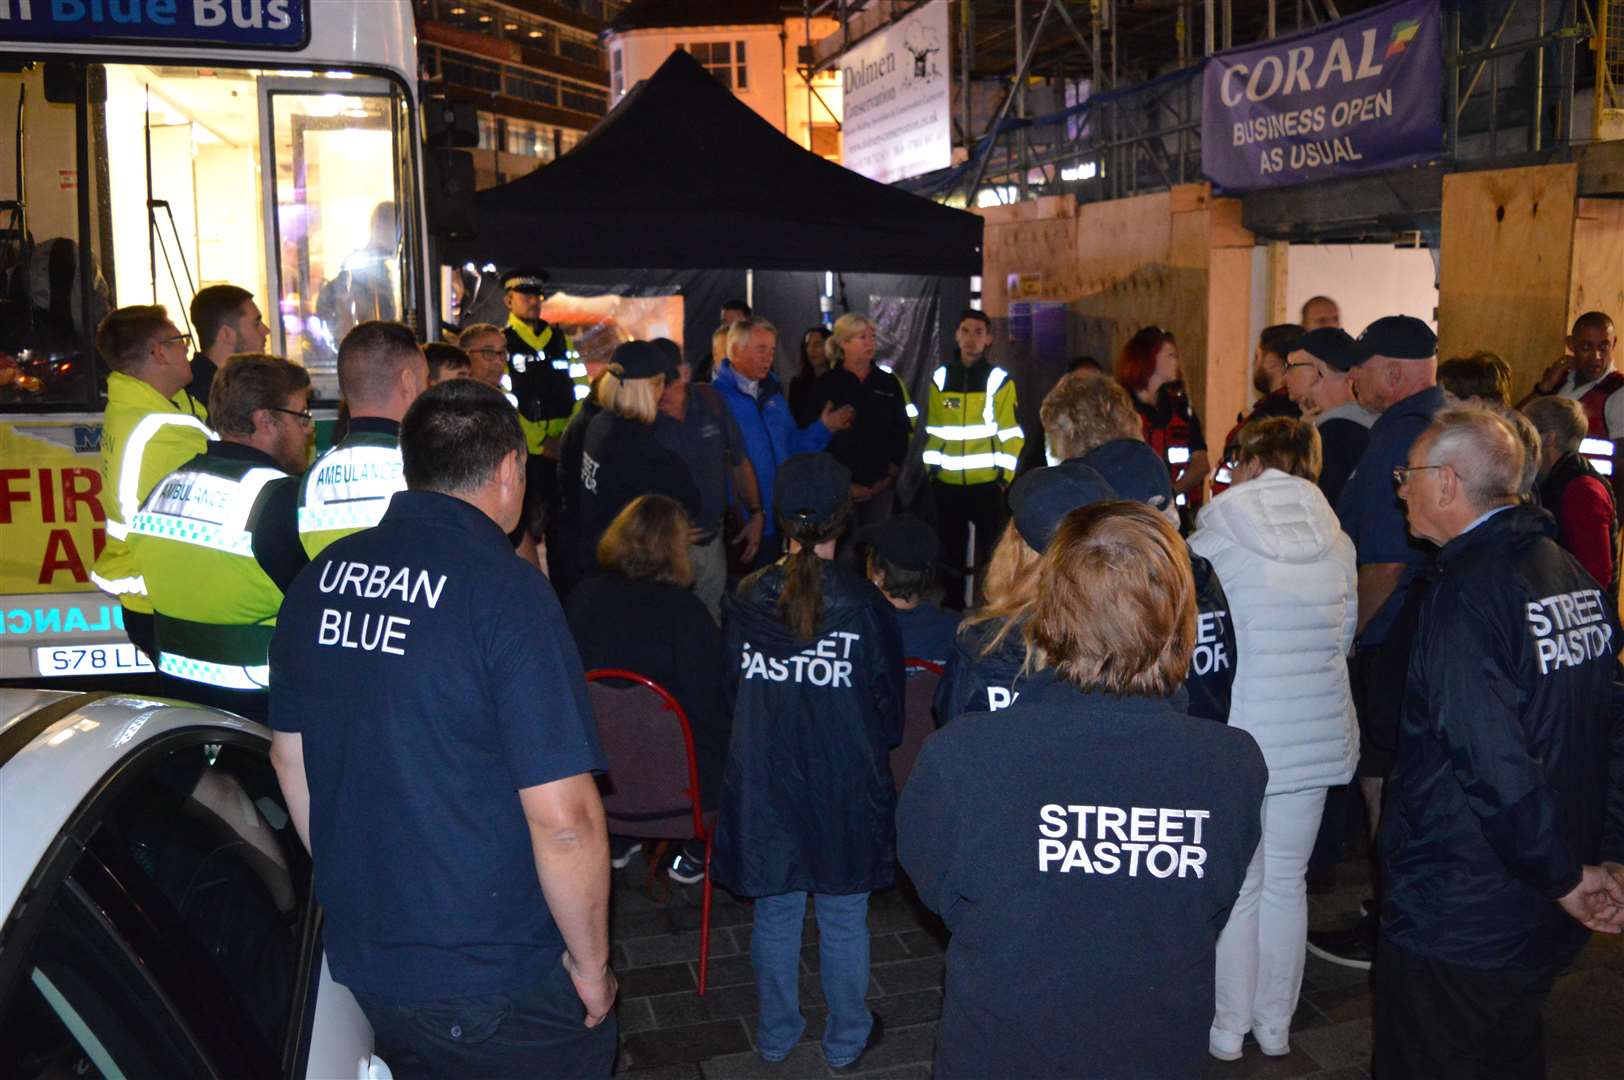 Volunteers from Urban Blue and Street Pastors gathered in Jubilee Square, Maidstone to hold a memorial service for Andre Bent